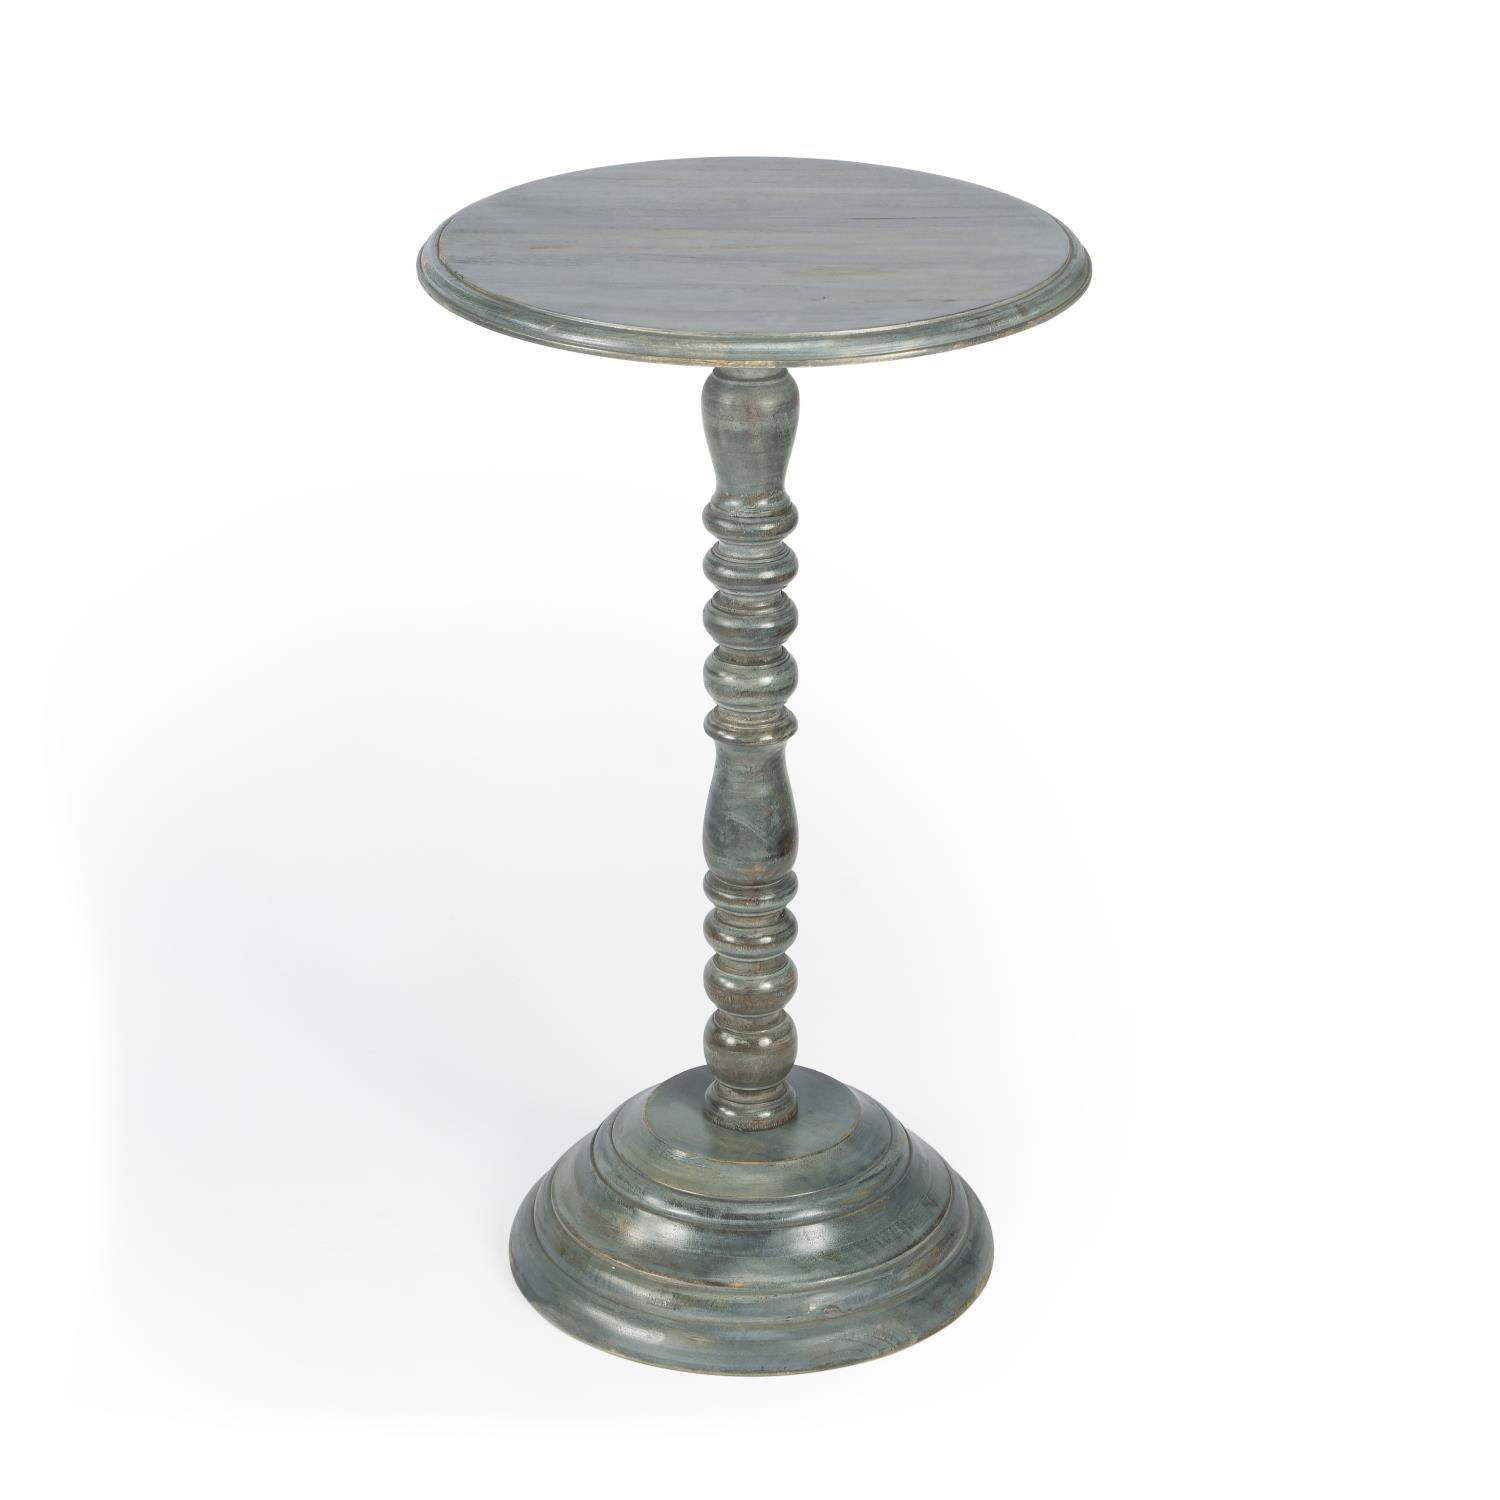 Butler Specialty Company Dani Solid Wood Pedestal 16"W Accent Table - Gray - image 2 of 7